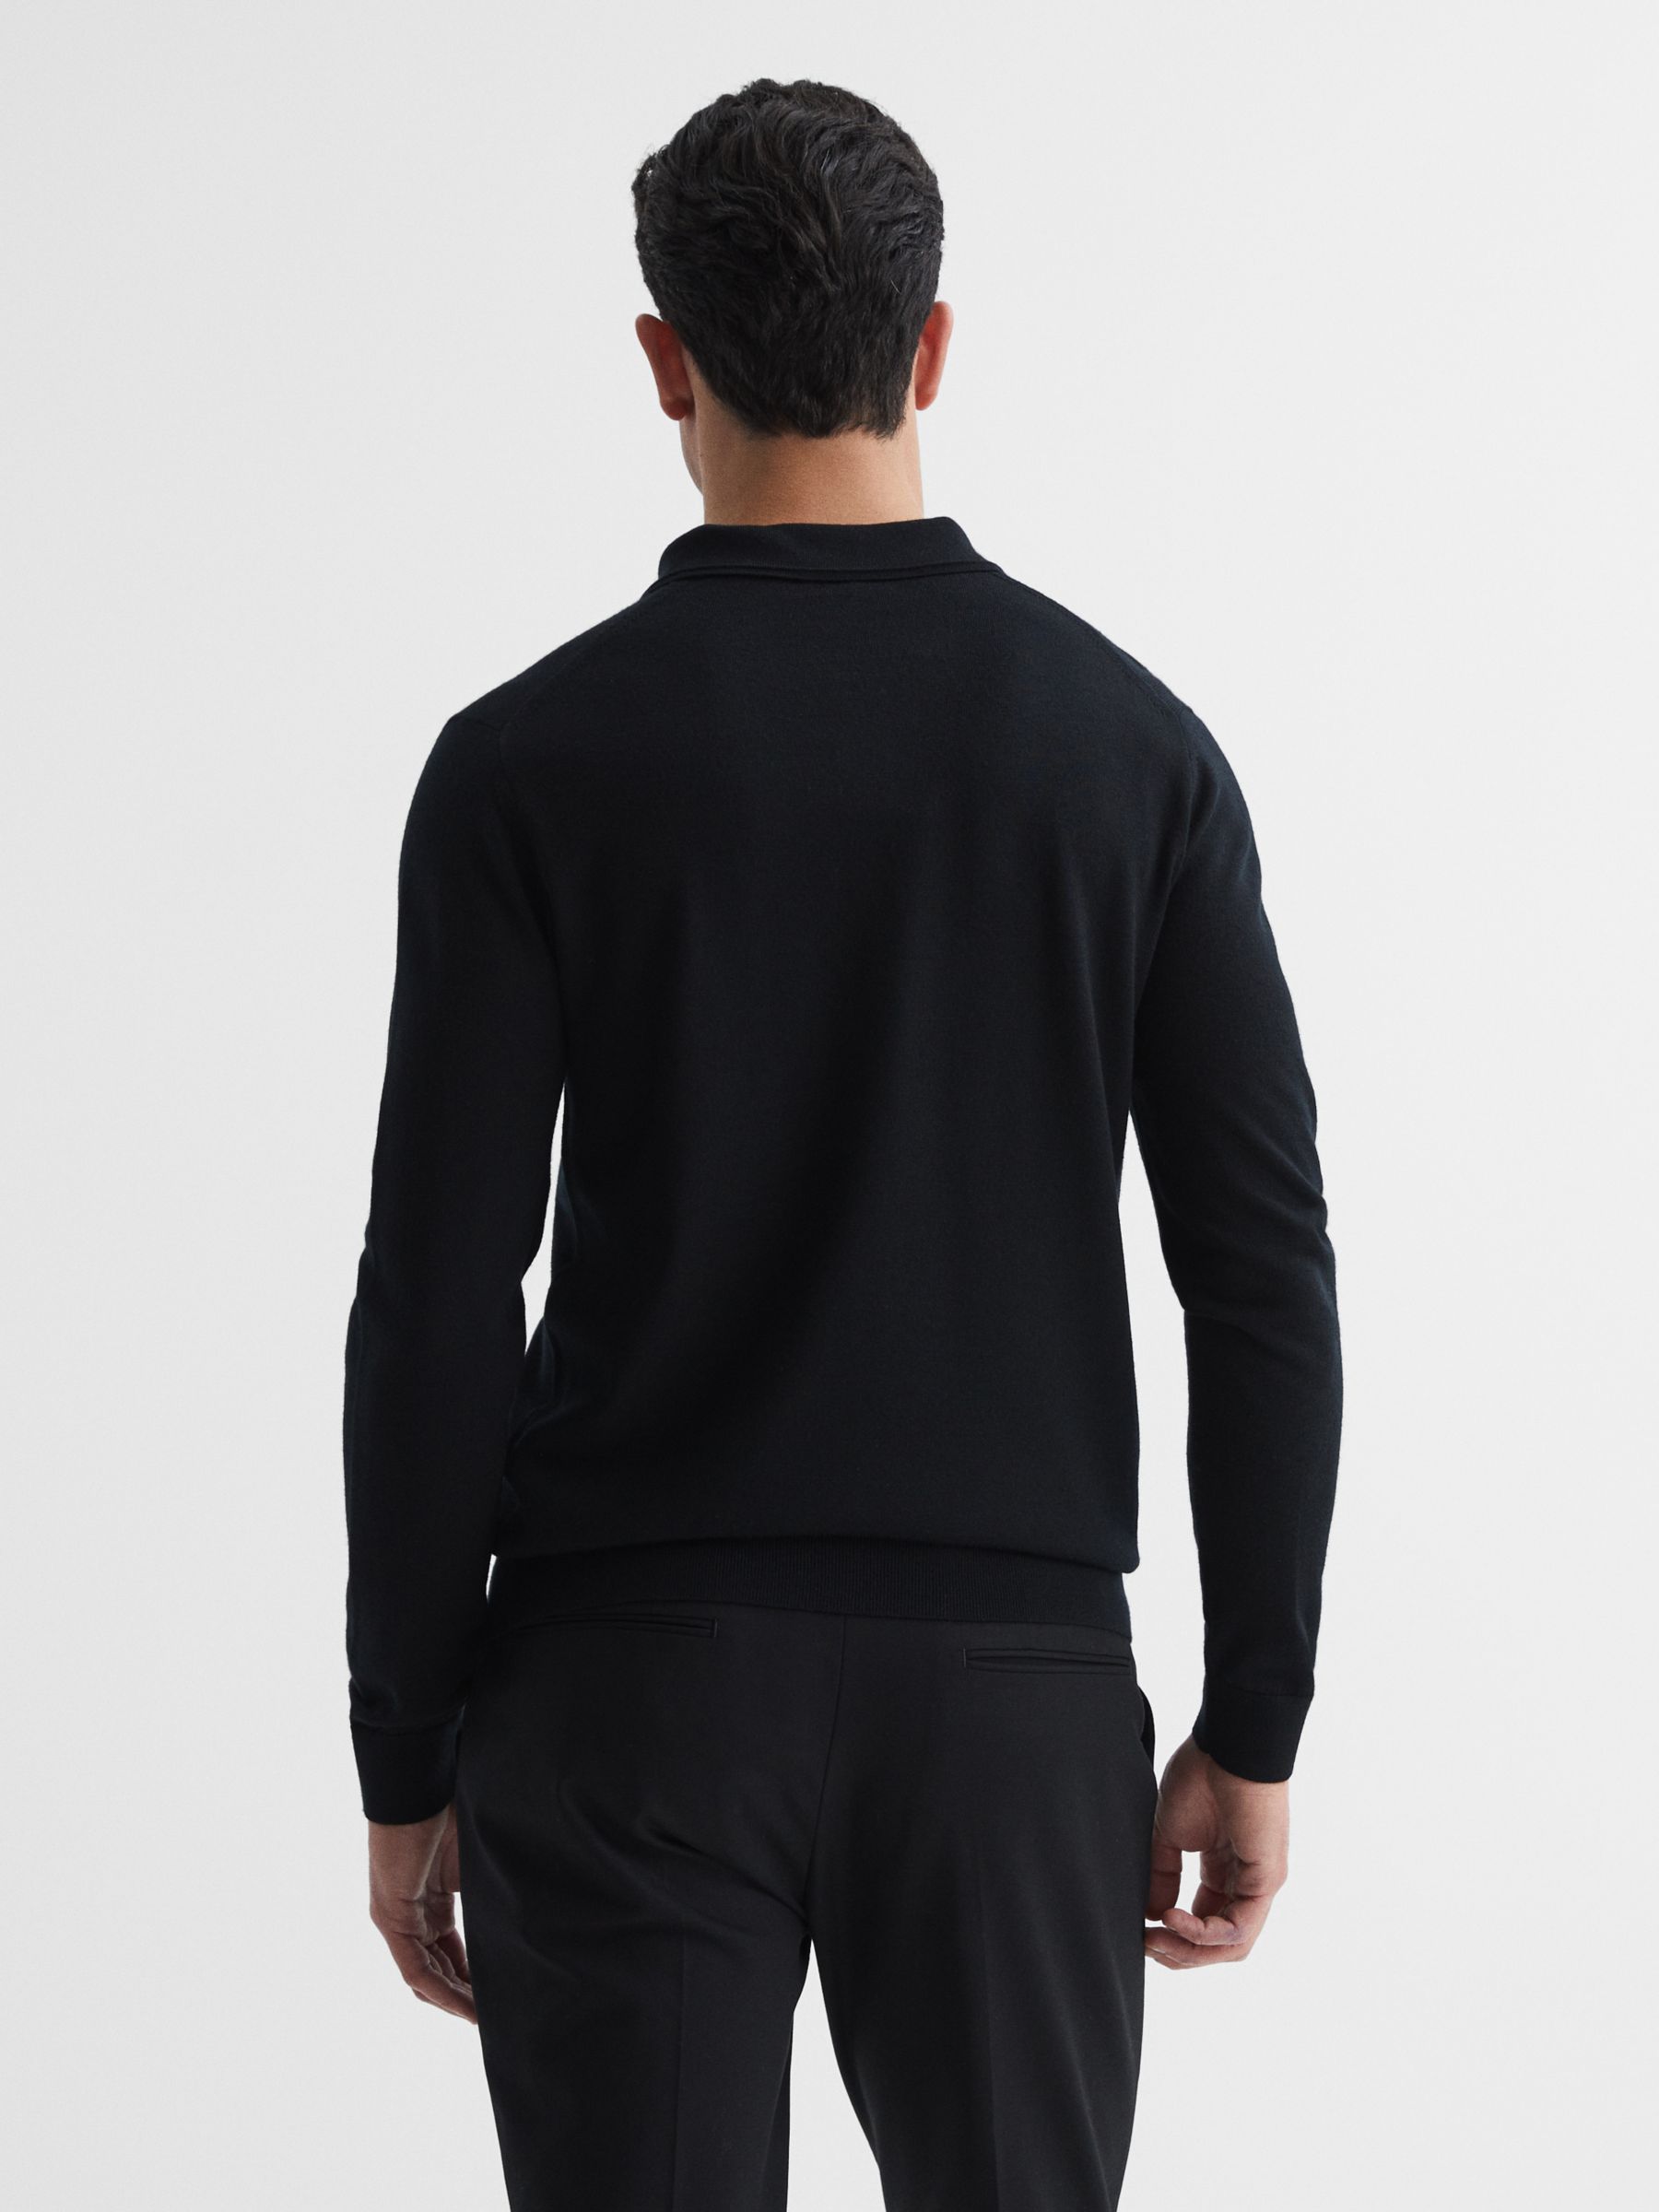 Reiss Trafford Knitted Wool Long Sleeve Polo Top, Black at John Lewis ...